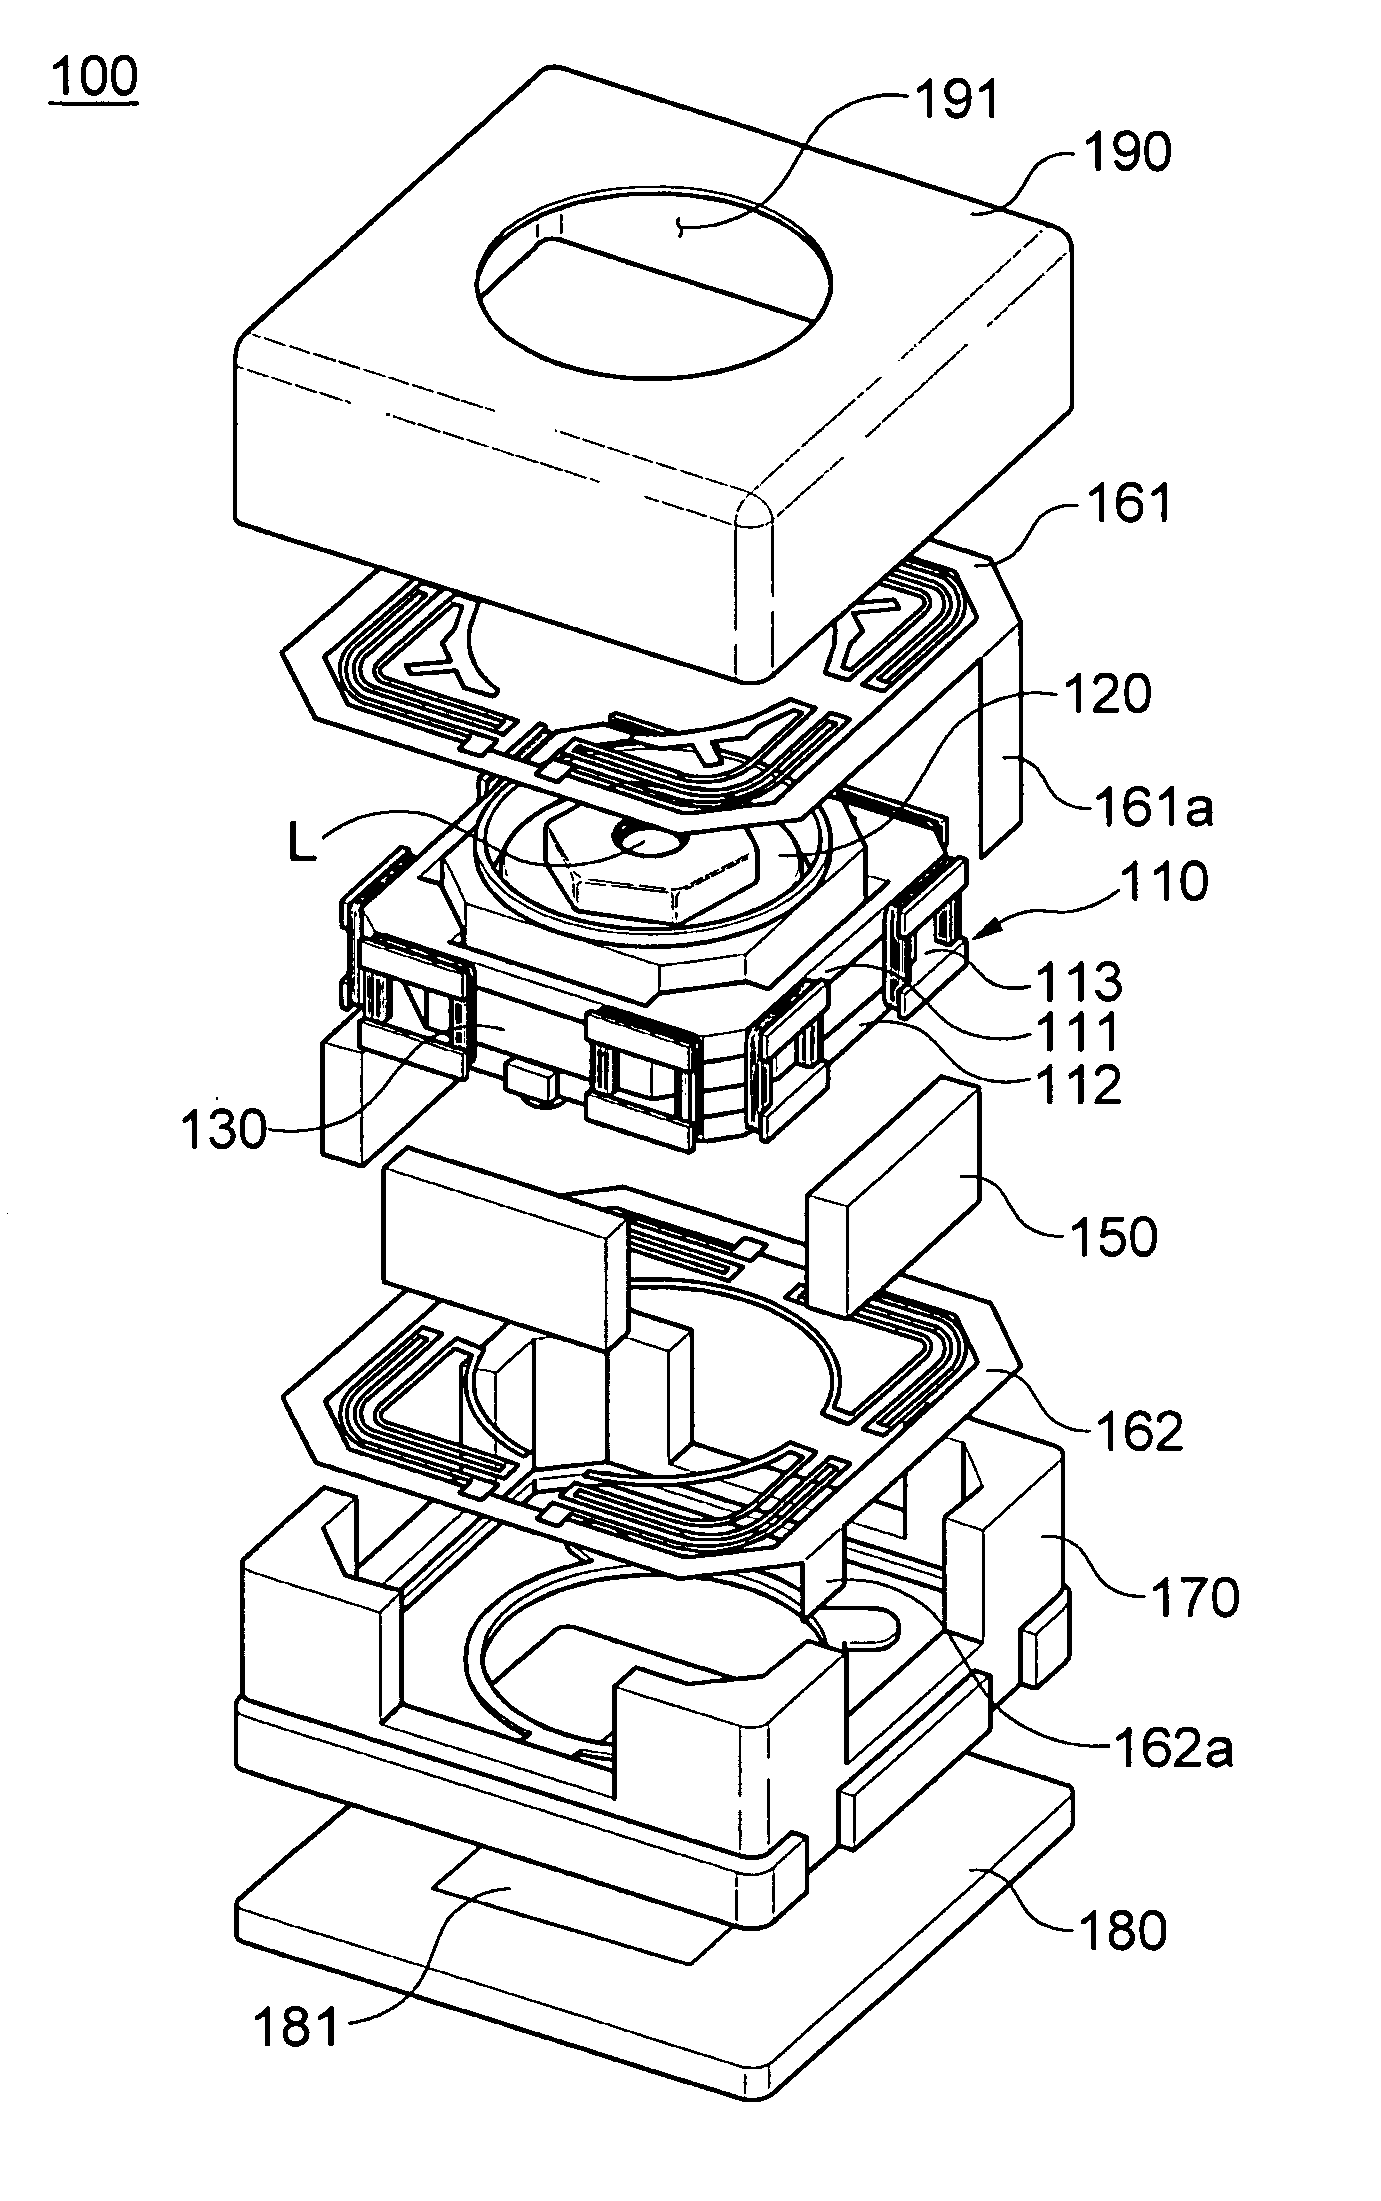 Image photographing device having function for compensating for hand vibration